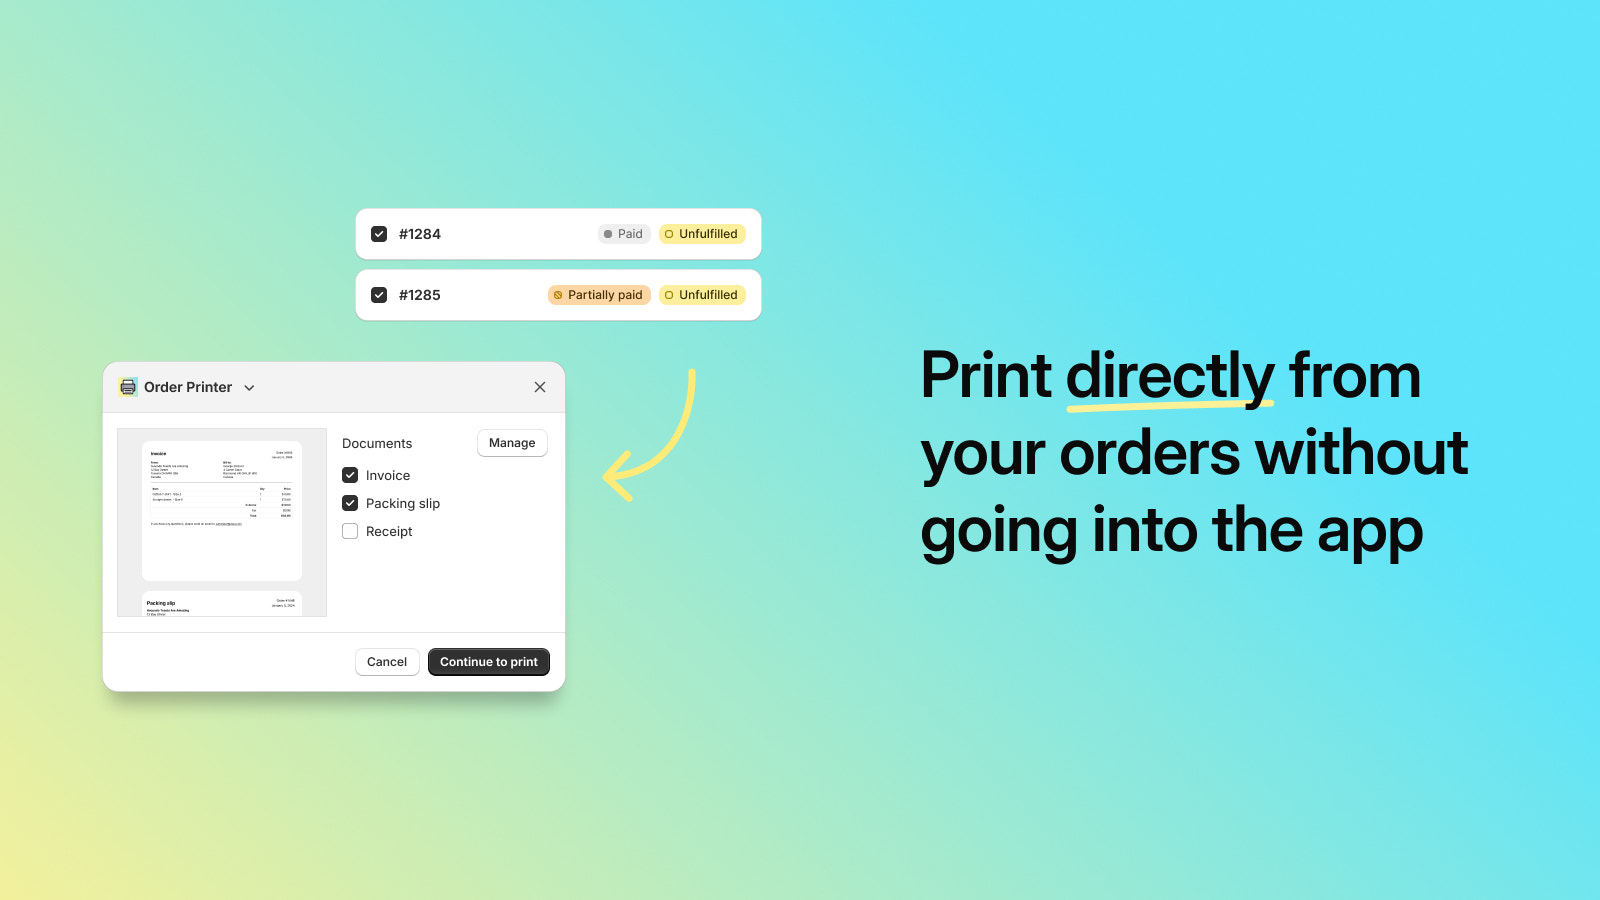 Print directly from your orders without going into the app